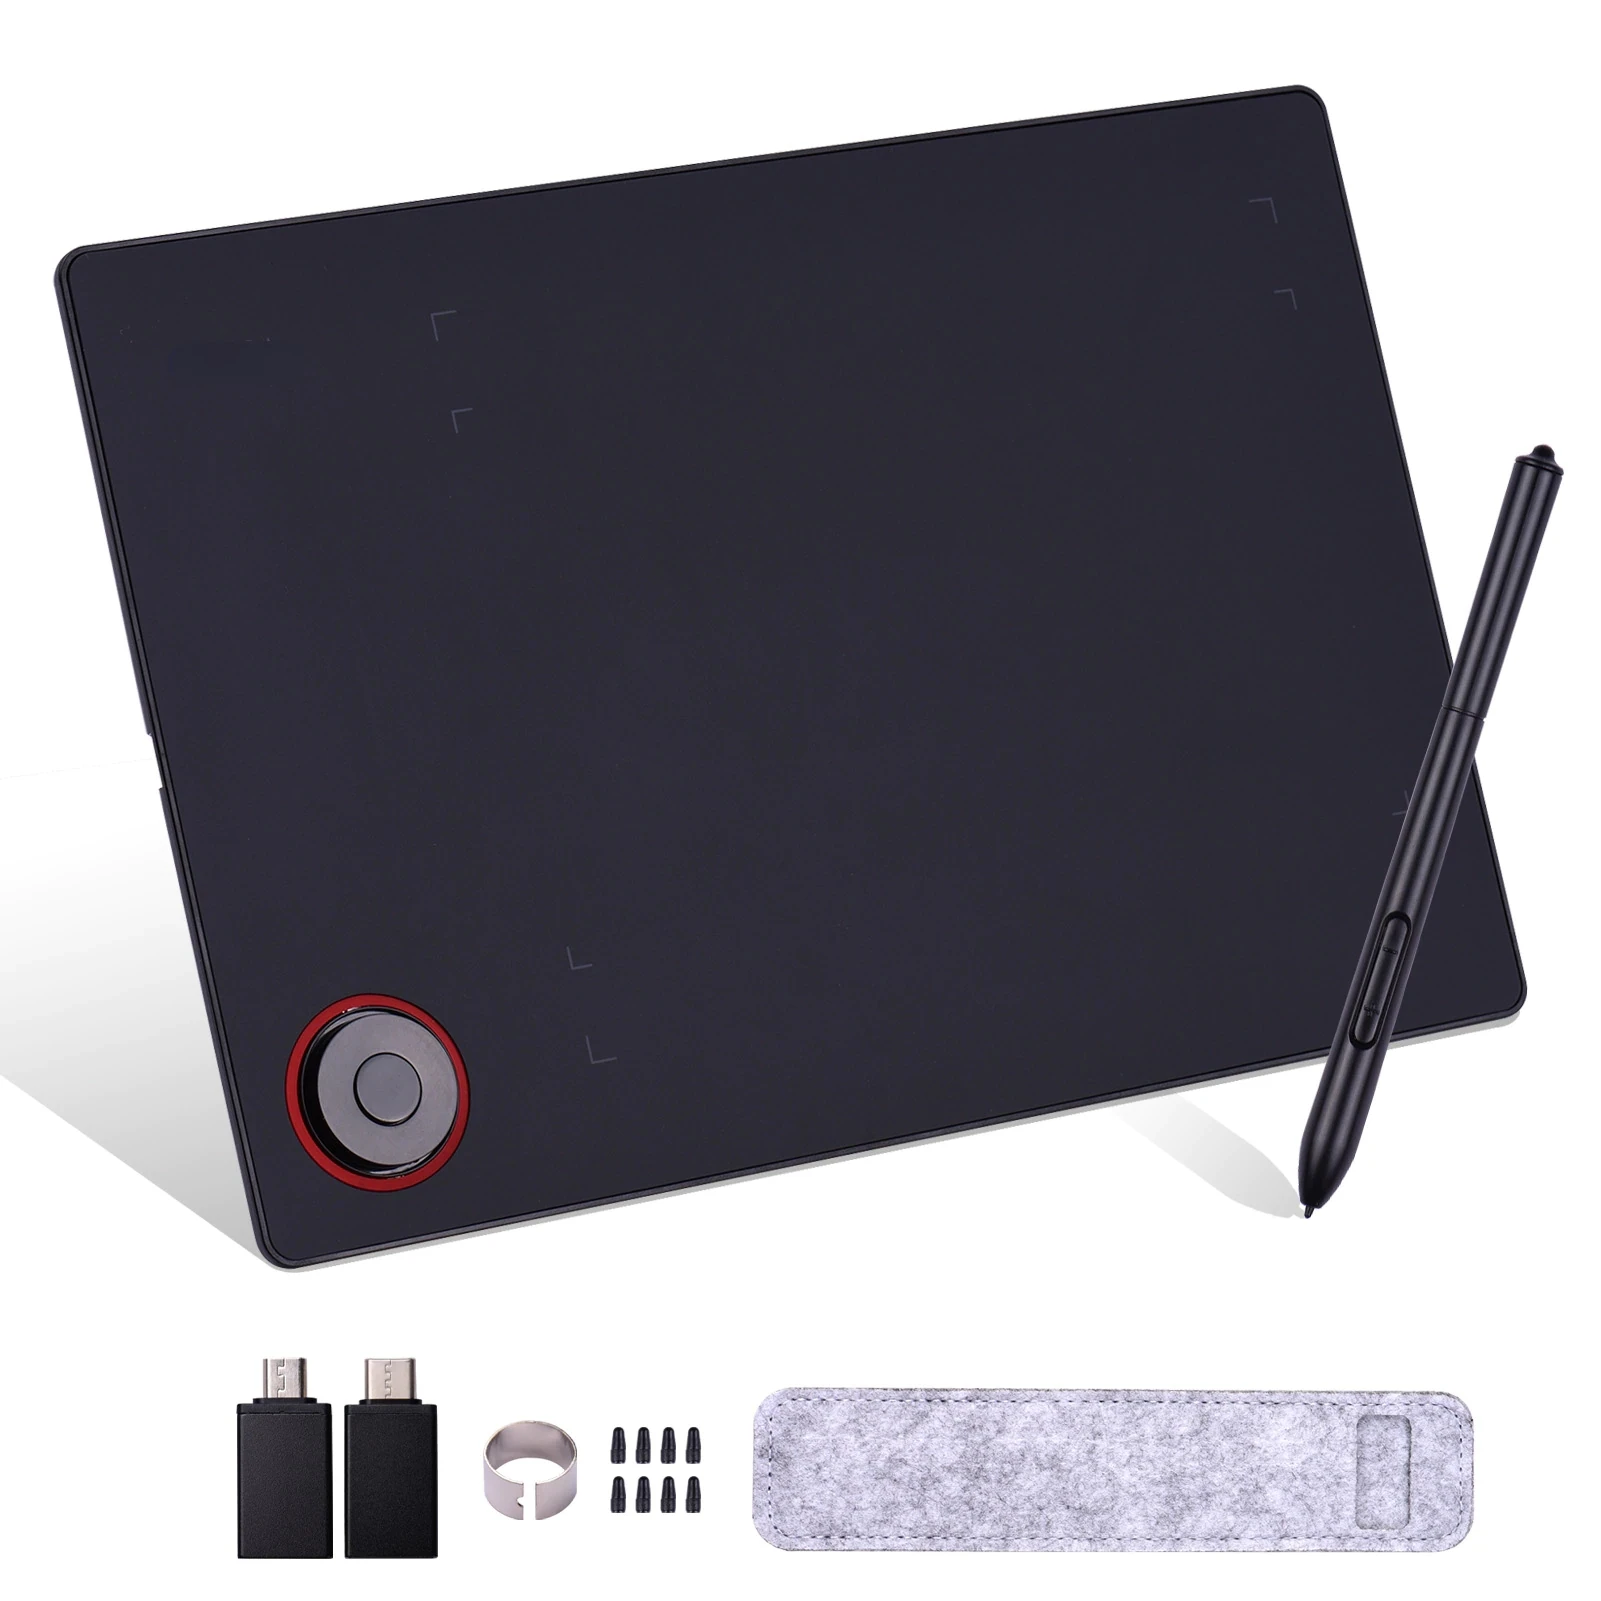 Drawing Tablet With Roller Key Large Active Area Digital Tablet Writing Board Knob 8192 Level Battery-Free Stylus For PC